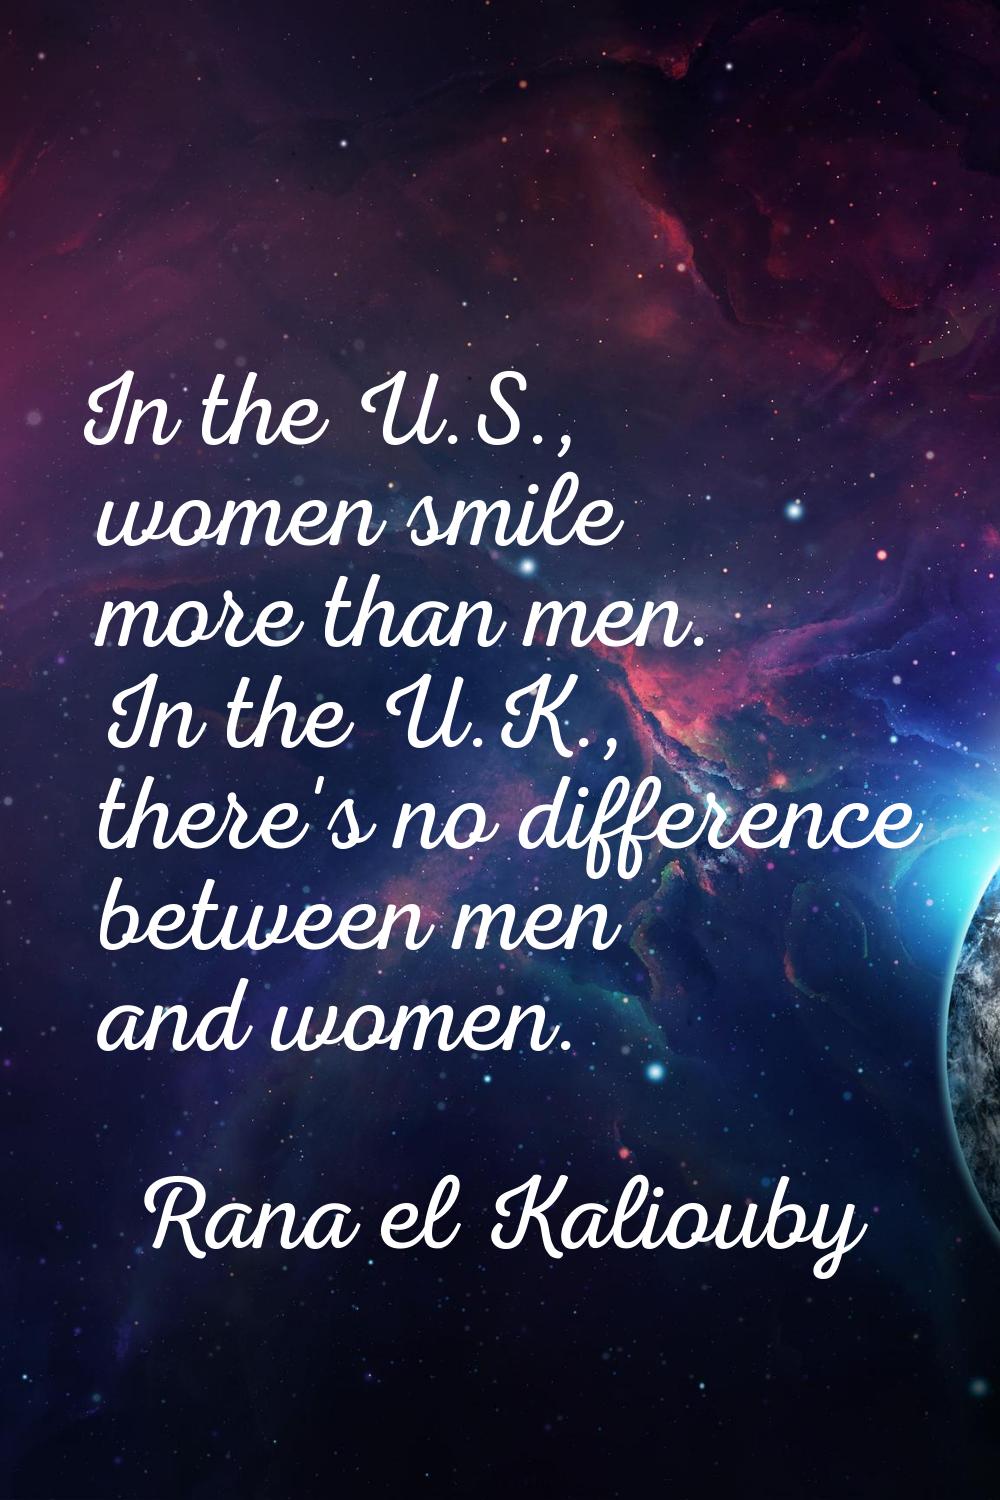 In the U.S., women smile more than men. In the U.K., there's no difference between men and women.